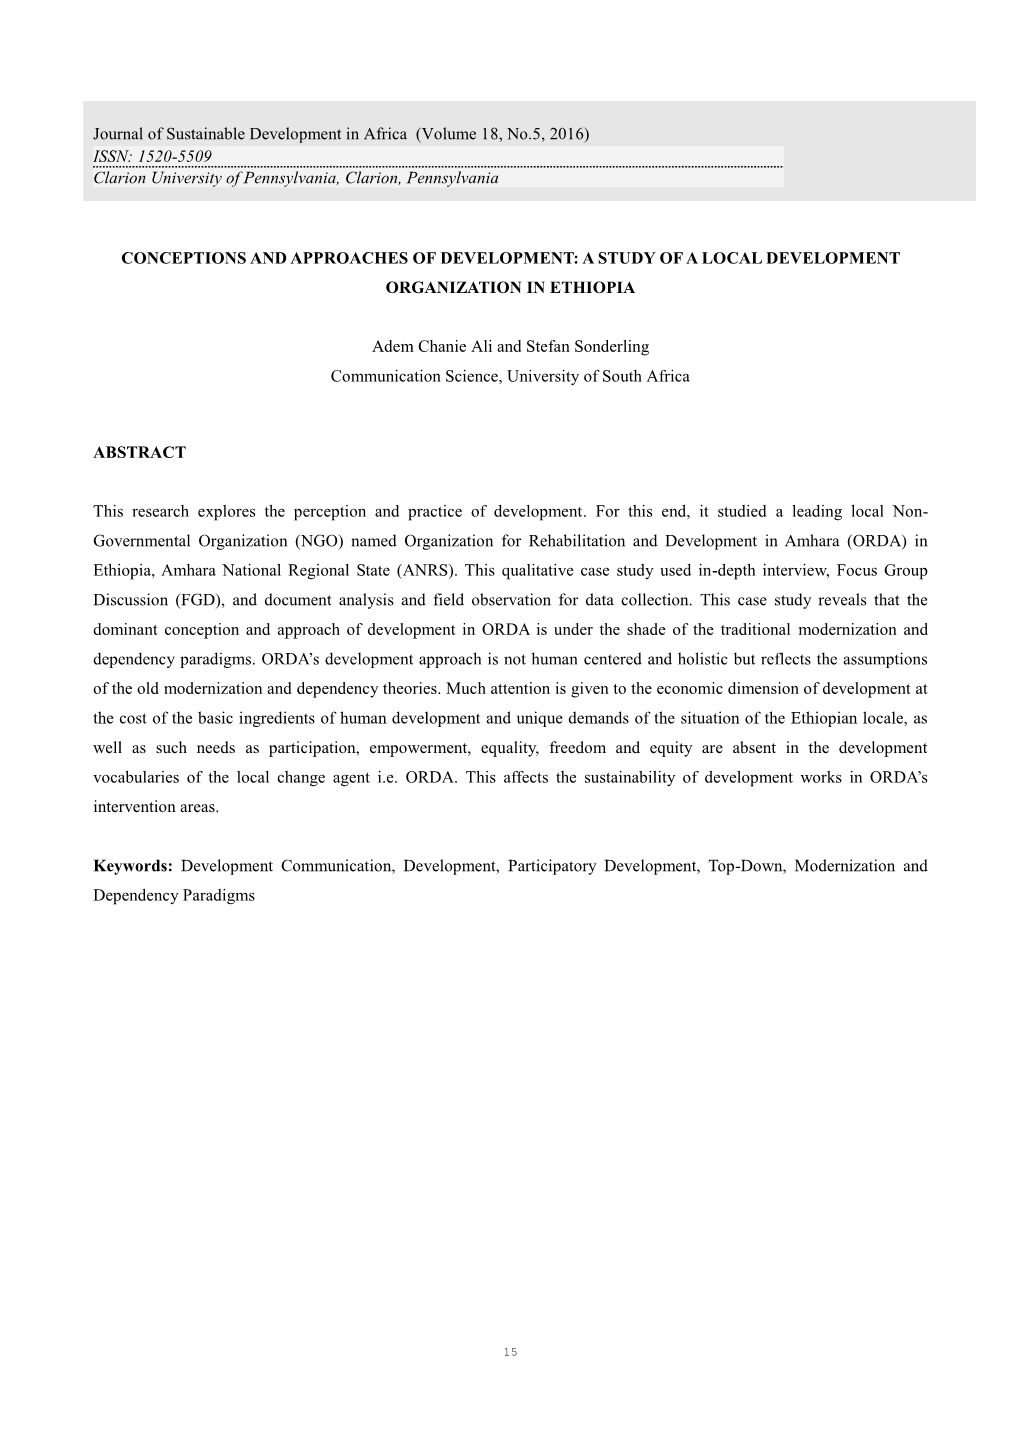 Conceptions and Approaches of Development: a Study of a Local Development Organization in Ethiopia